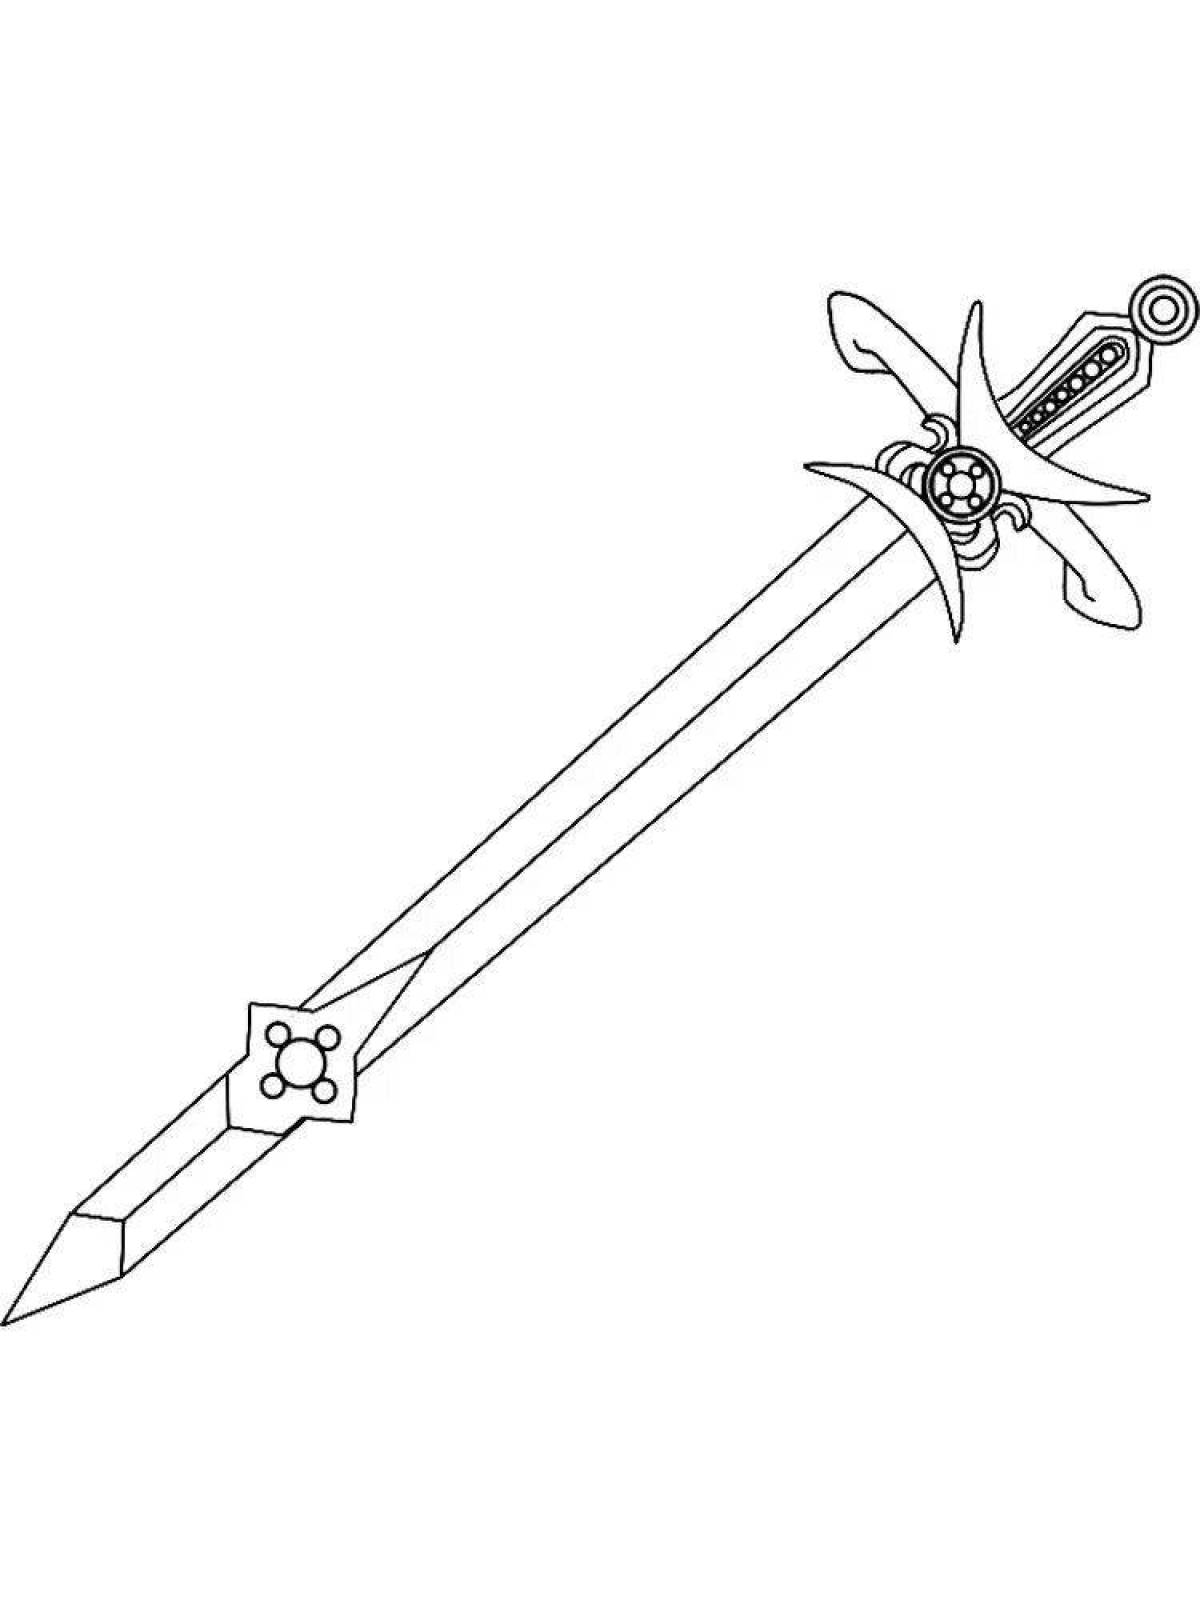 Awesome sword coloring page for kids